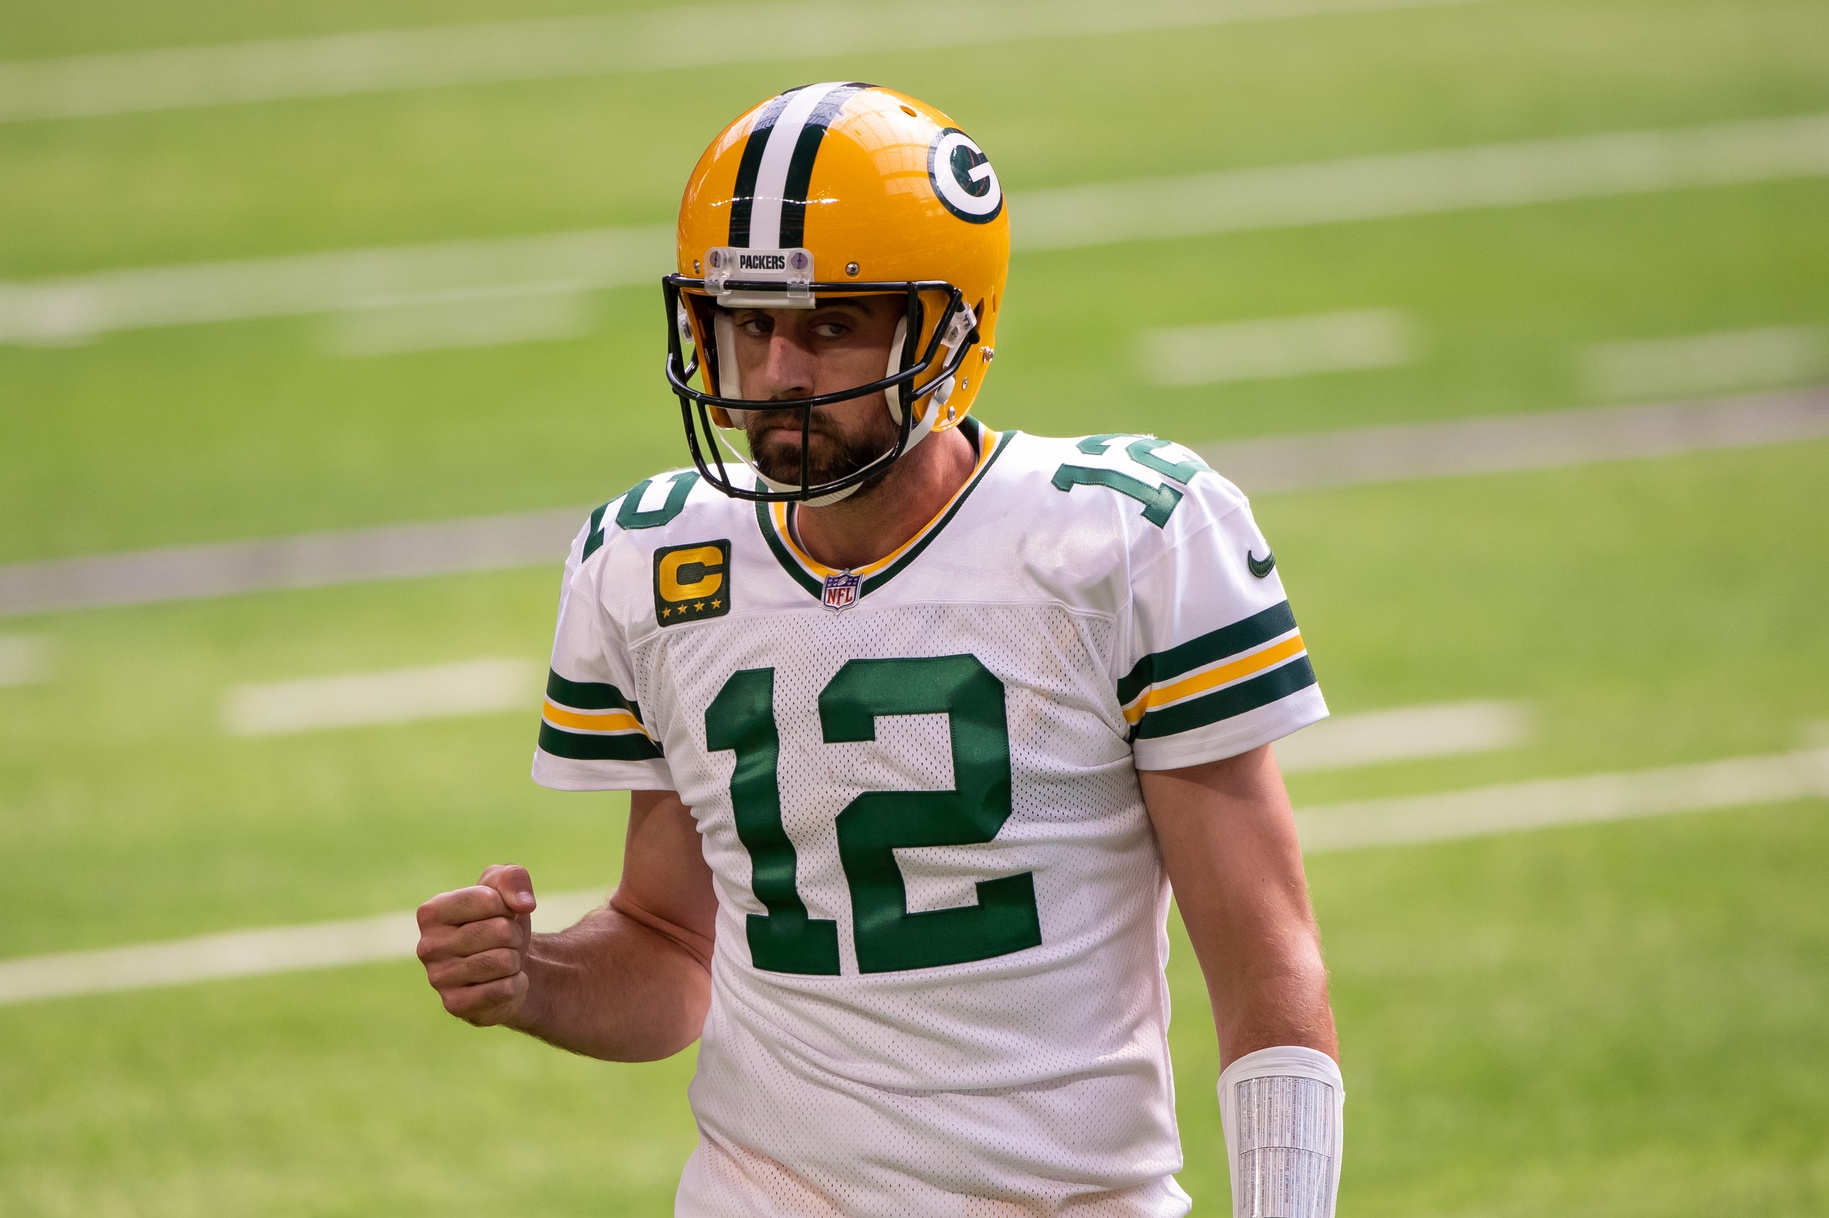 Aaron Rodgers signs contract extension assuring he will remain in Green Bay